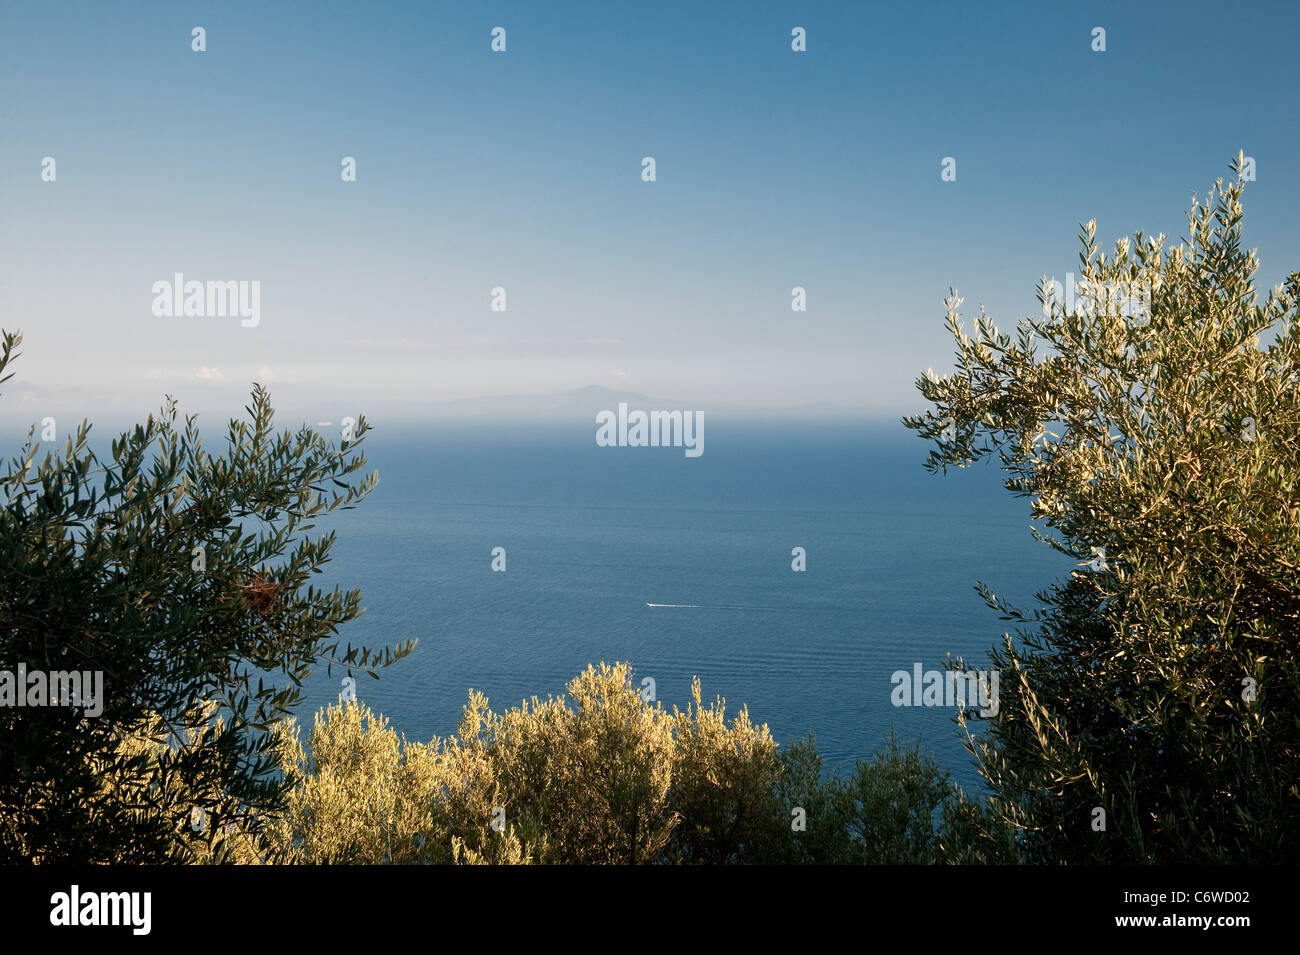 The view from above Amalfi, Italy, looking over the Tyrrhenian Sea towards the distant mountains of Sicily Stock Photo